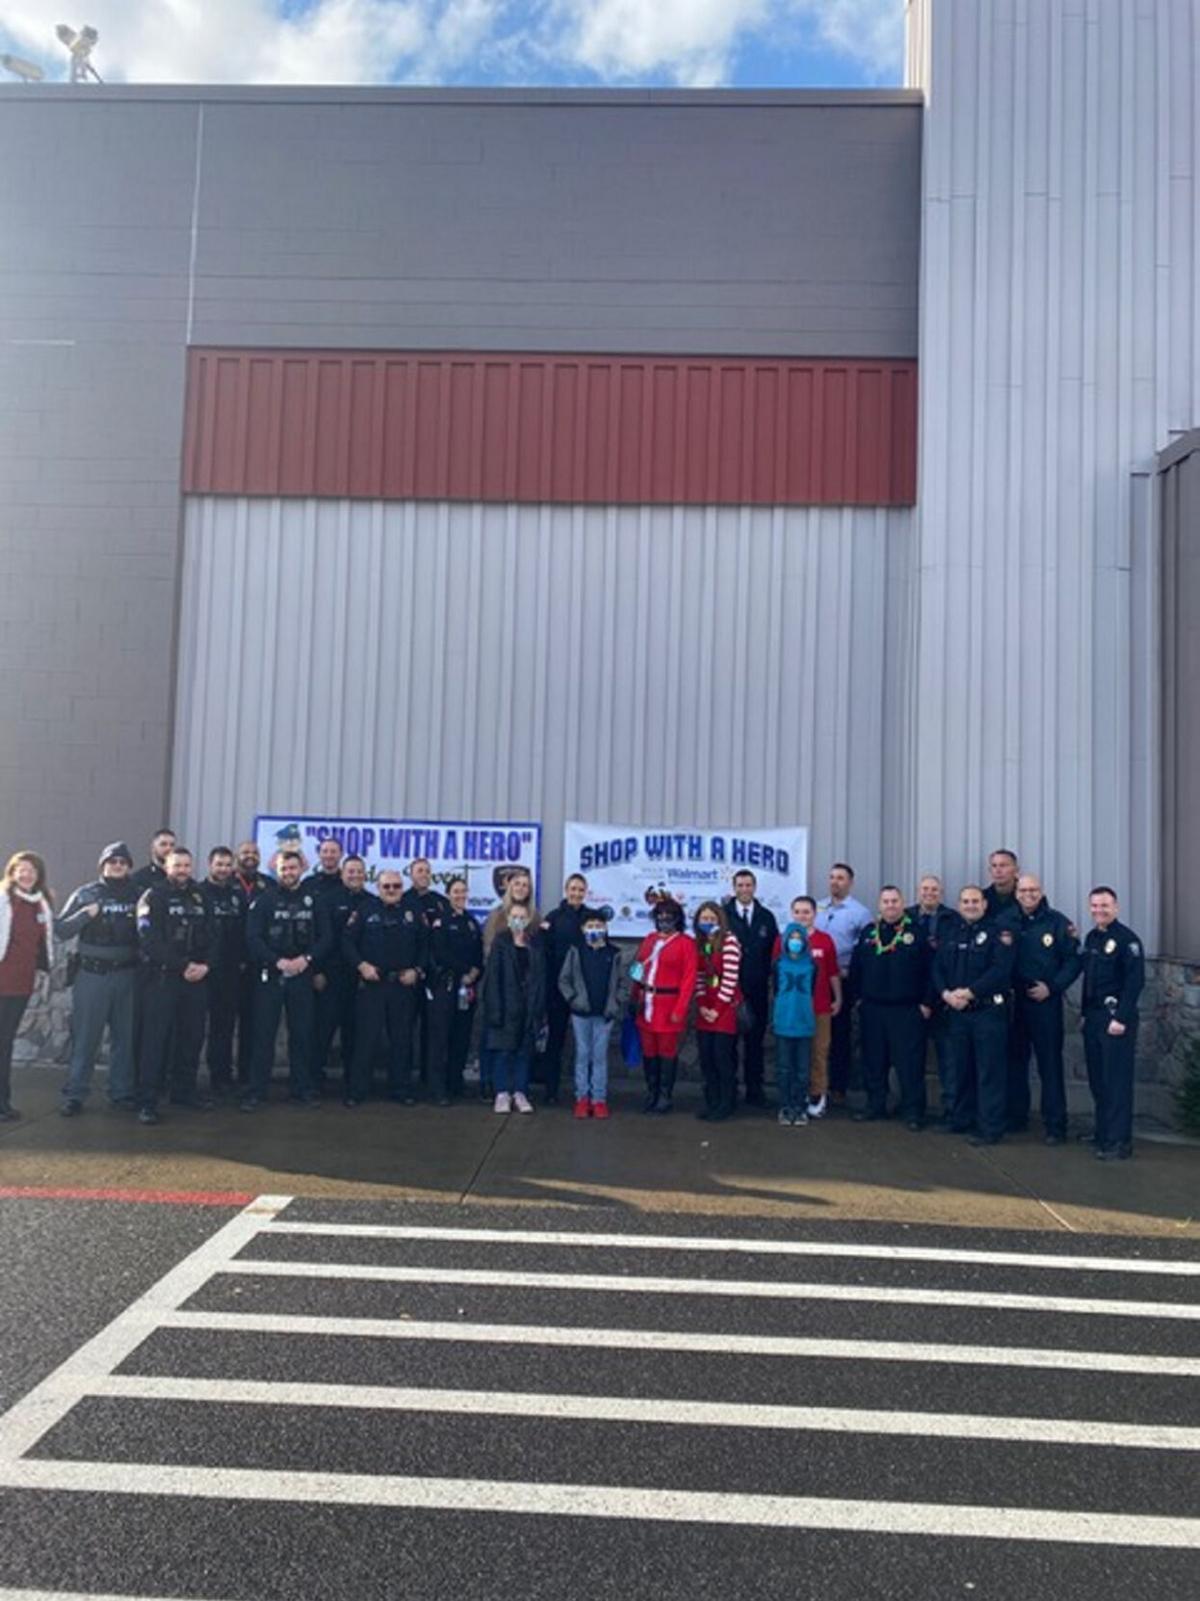 Phoenix, Fulton, and Oswego support Shop with a Hero